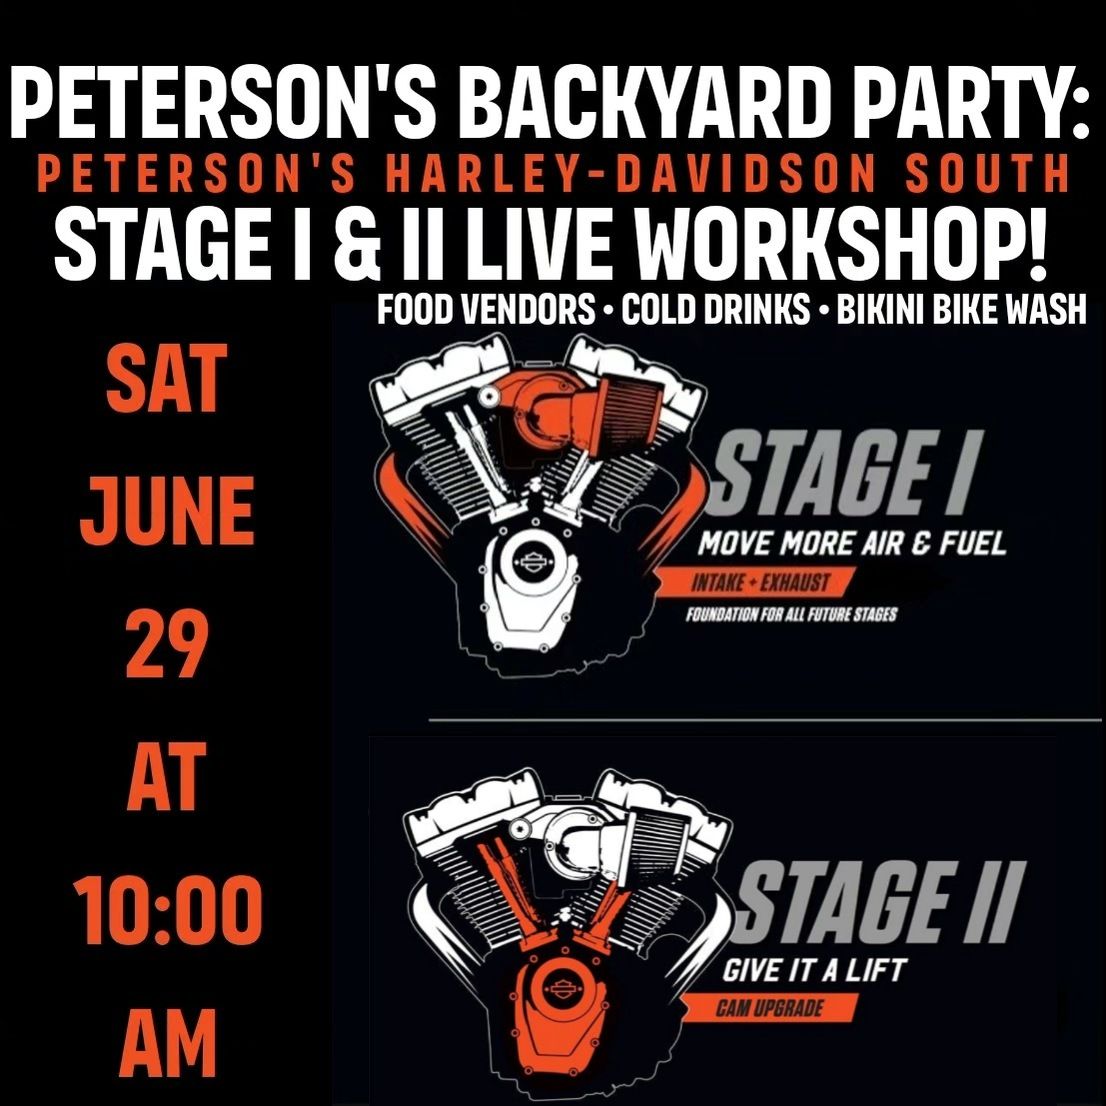 Peterson's Backyard Party: Stage 1 & 2 LIVE Workshop